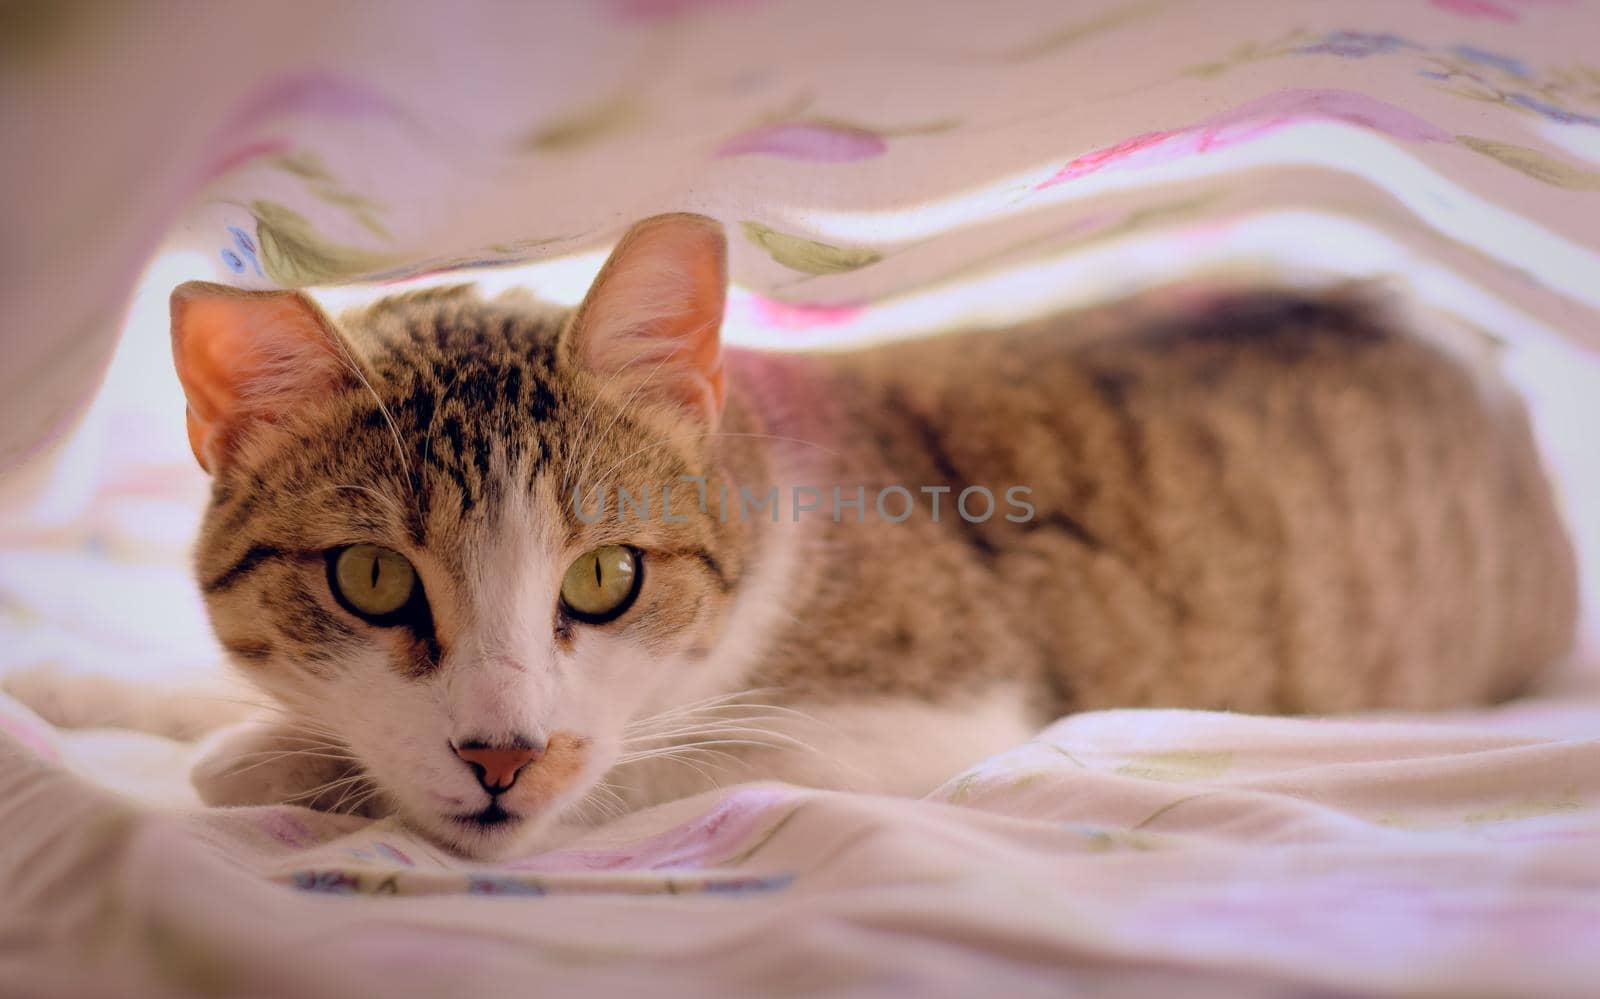 Gorgeous tabby cat with green eyes, staring at the camera, under the bedsheets. by hernan_hyper